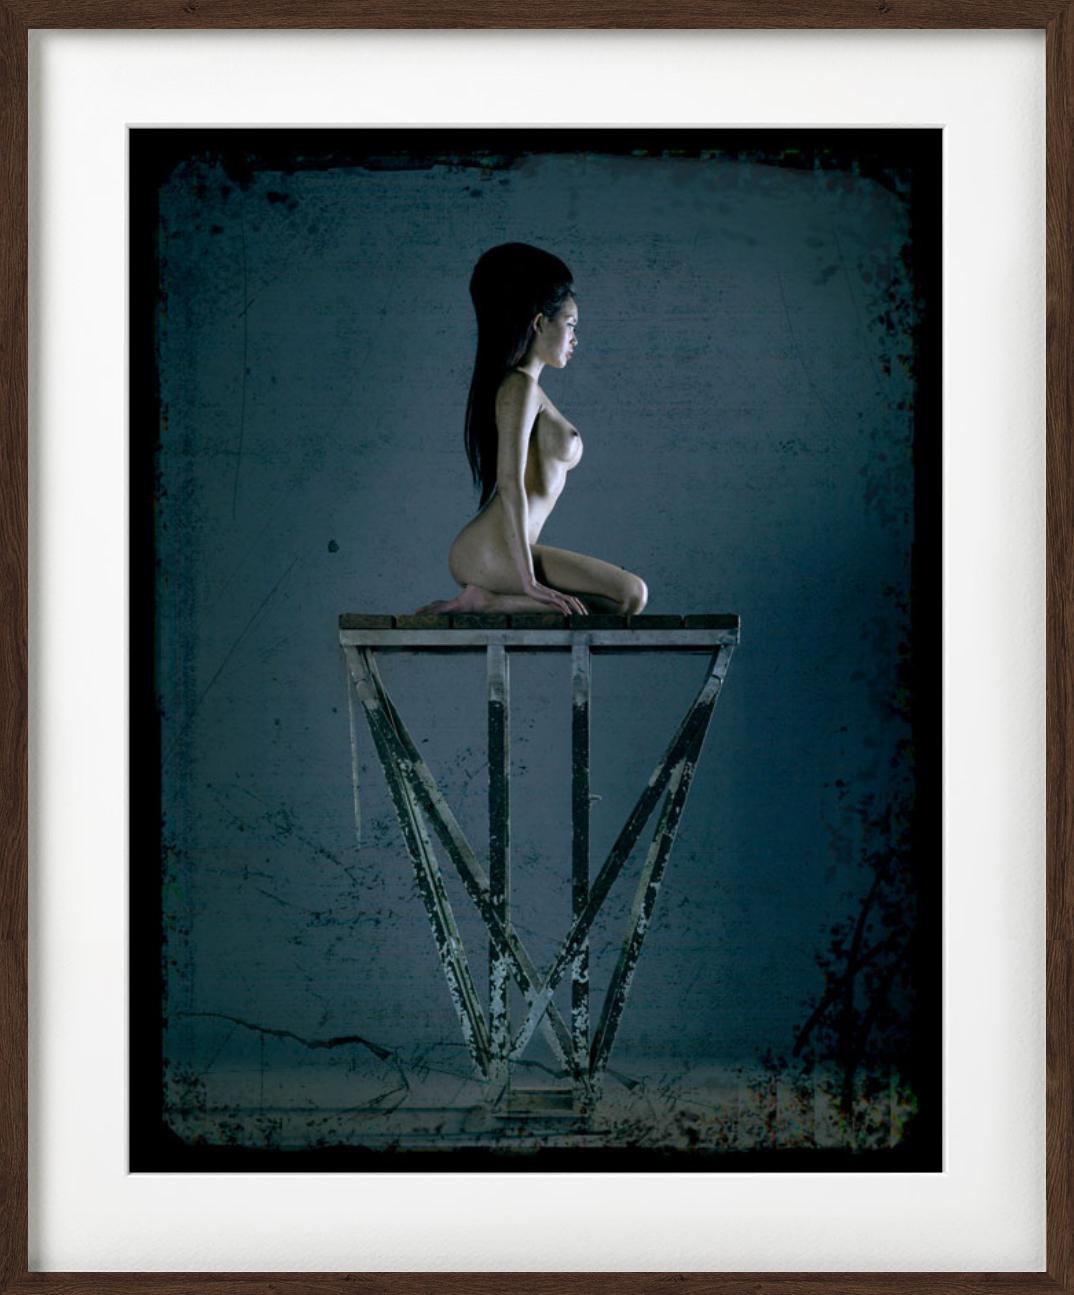 'Erotic Nude #4268' - nude in blue on a plattform, fine art photography, 2010 - Photograph by Andreas H. Bitesnich